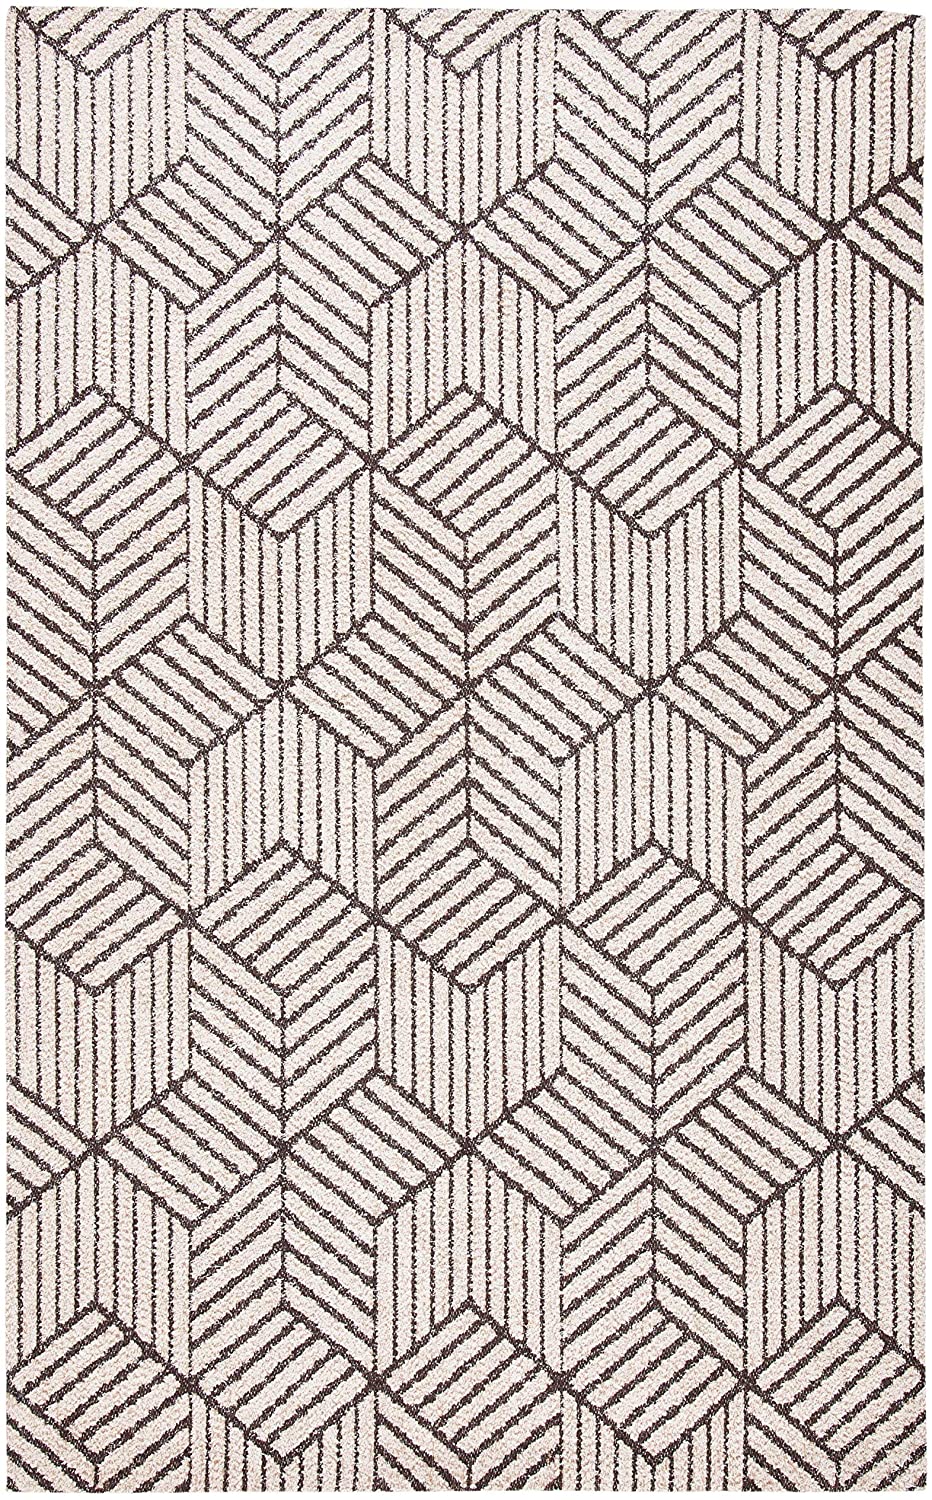 Safavieh Classic Vintage Clv902A Natural/Ivory Area Rug